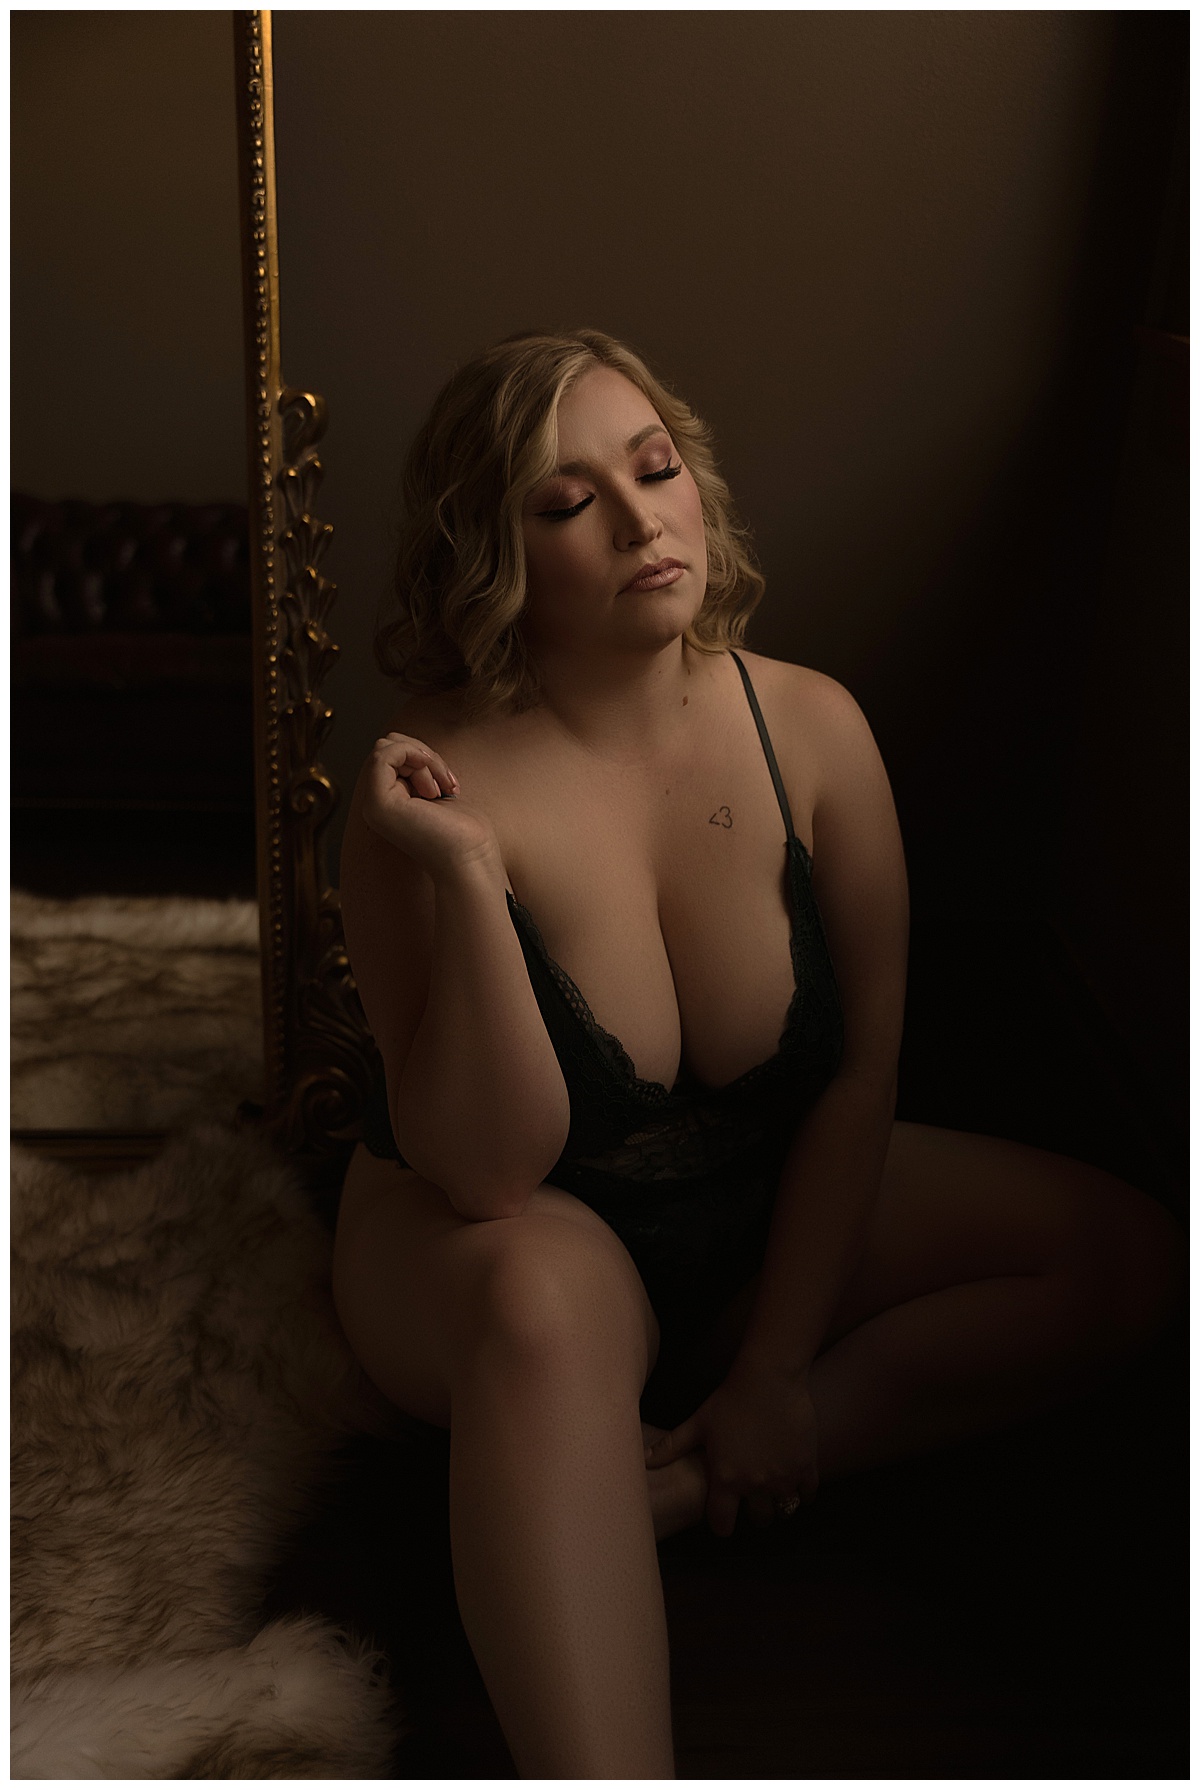 Female sits on the floor wearing black lace lingerie for Sioux Falls Boudoir Photographer